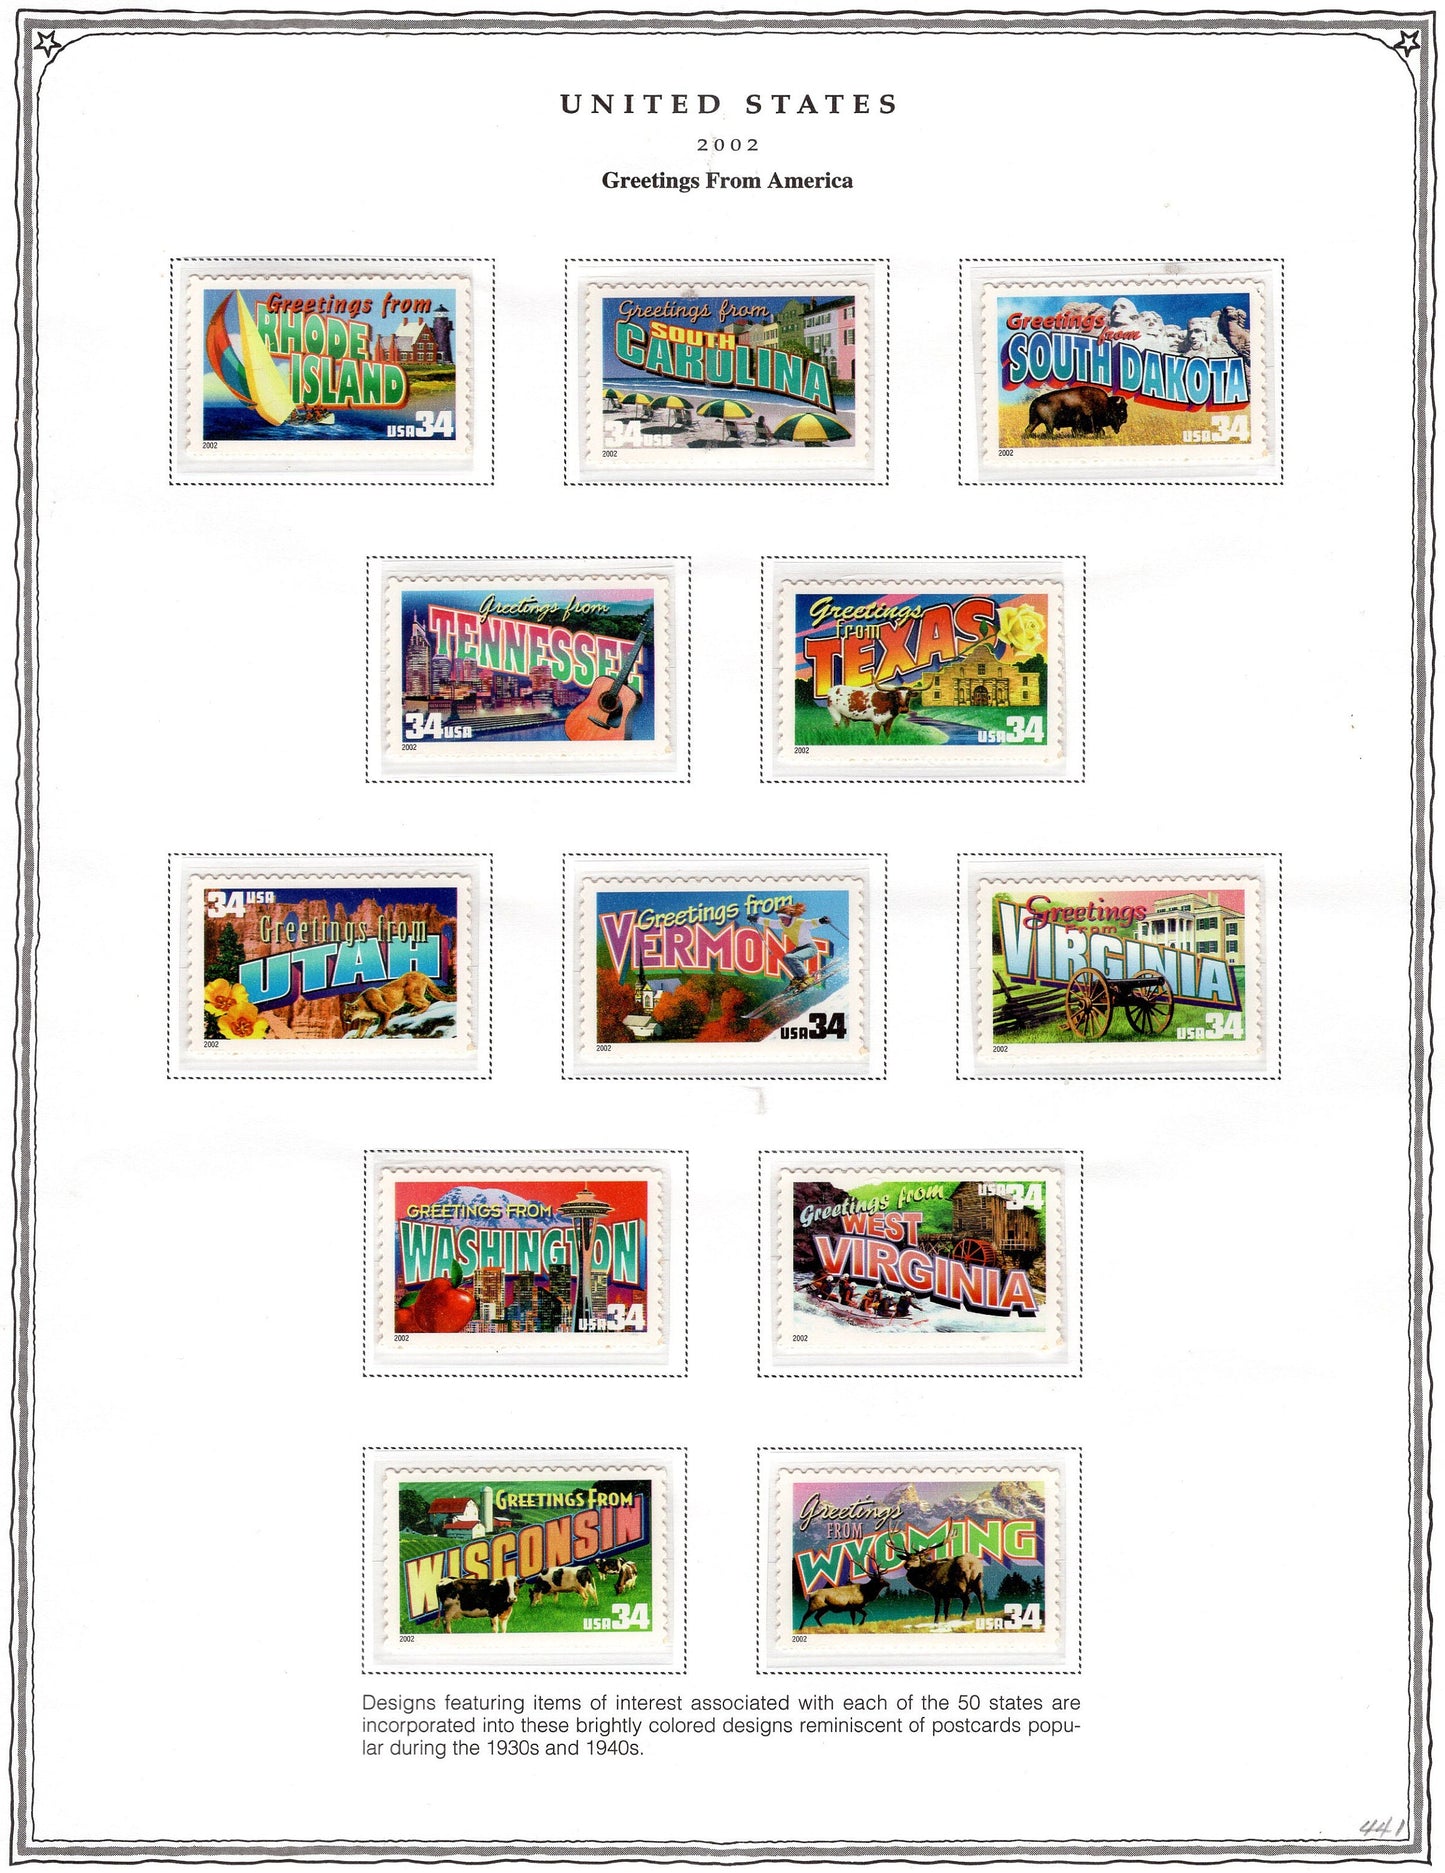 50 AMERICAN GREETINGS 34c Postcard Style Unused Fresh USA Postage Stamps - Issued in 2002 - s3561